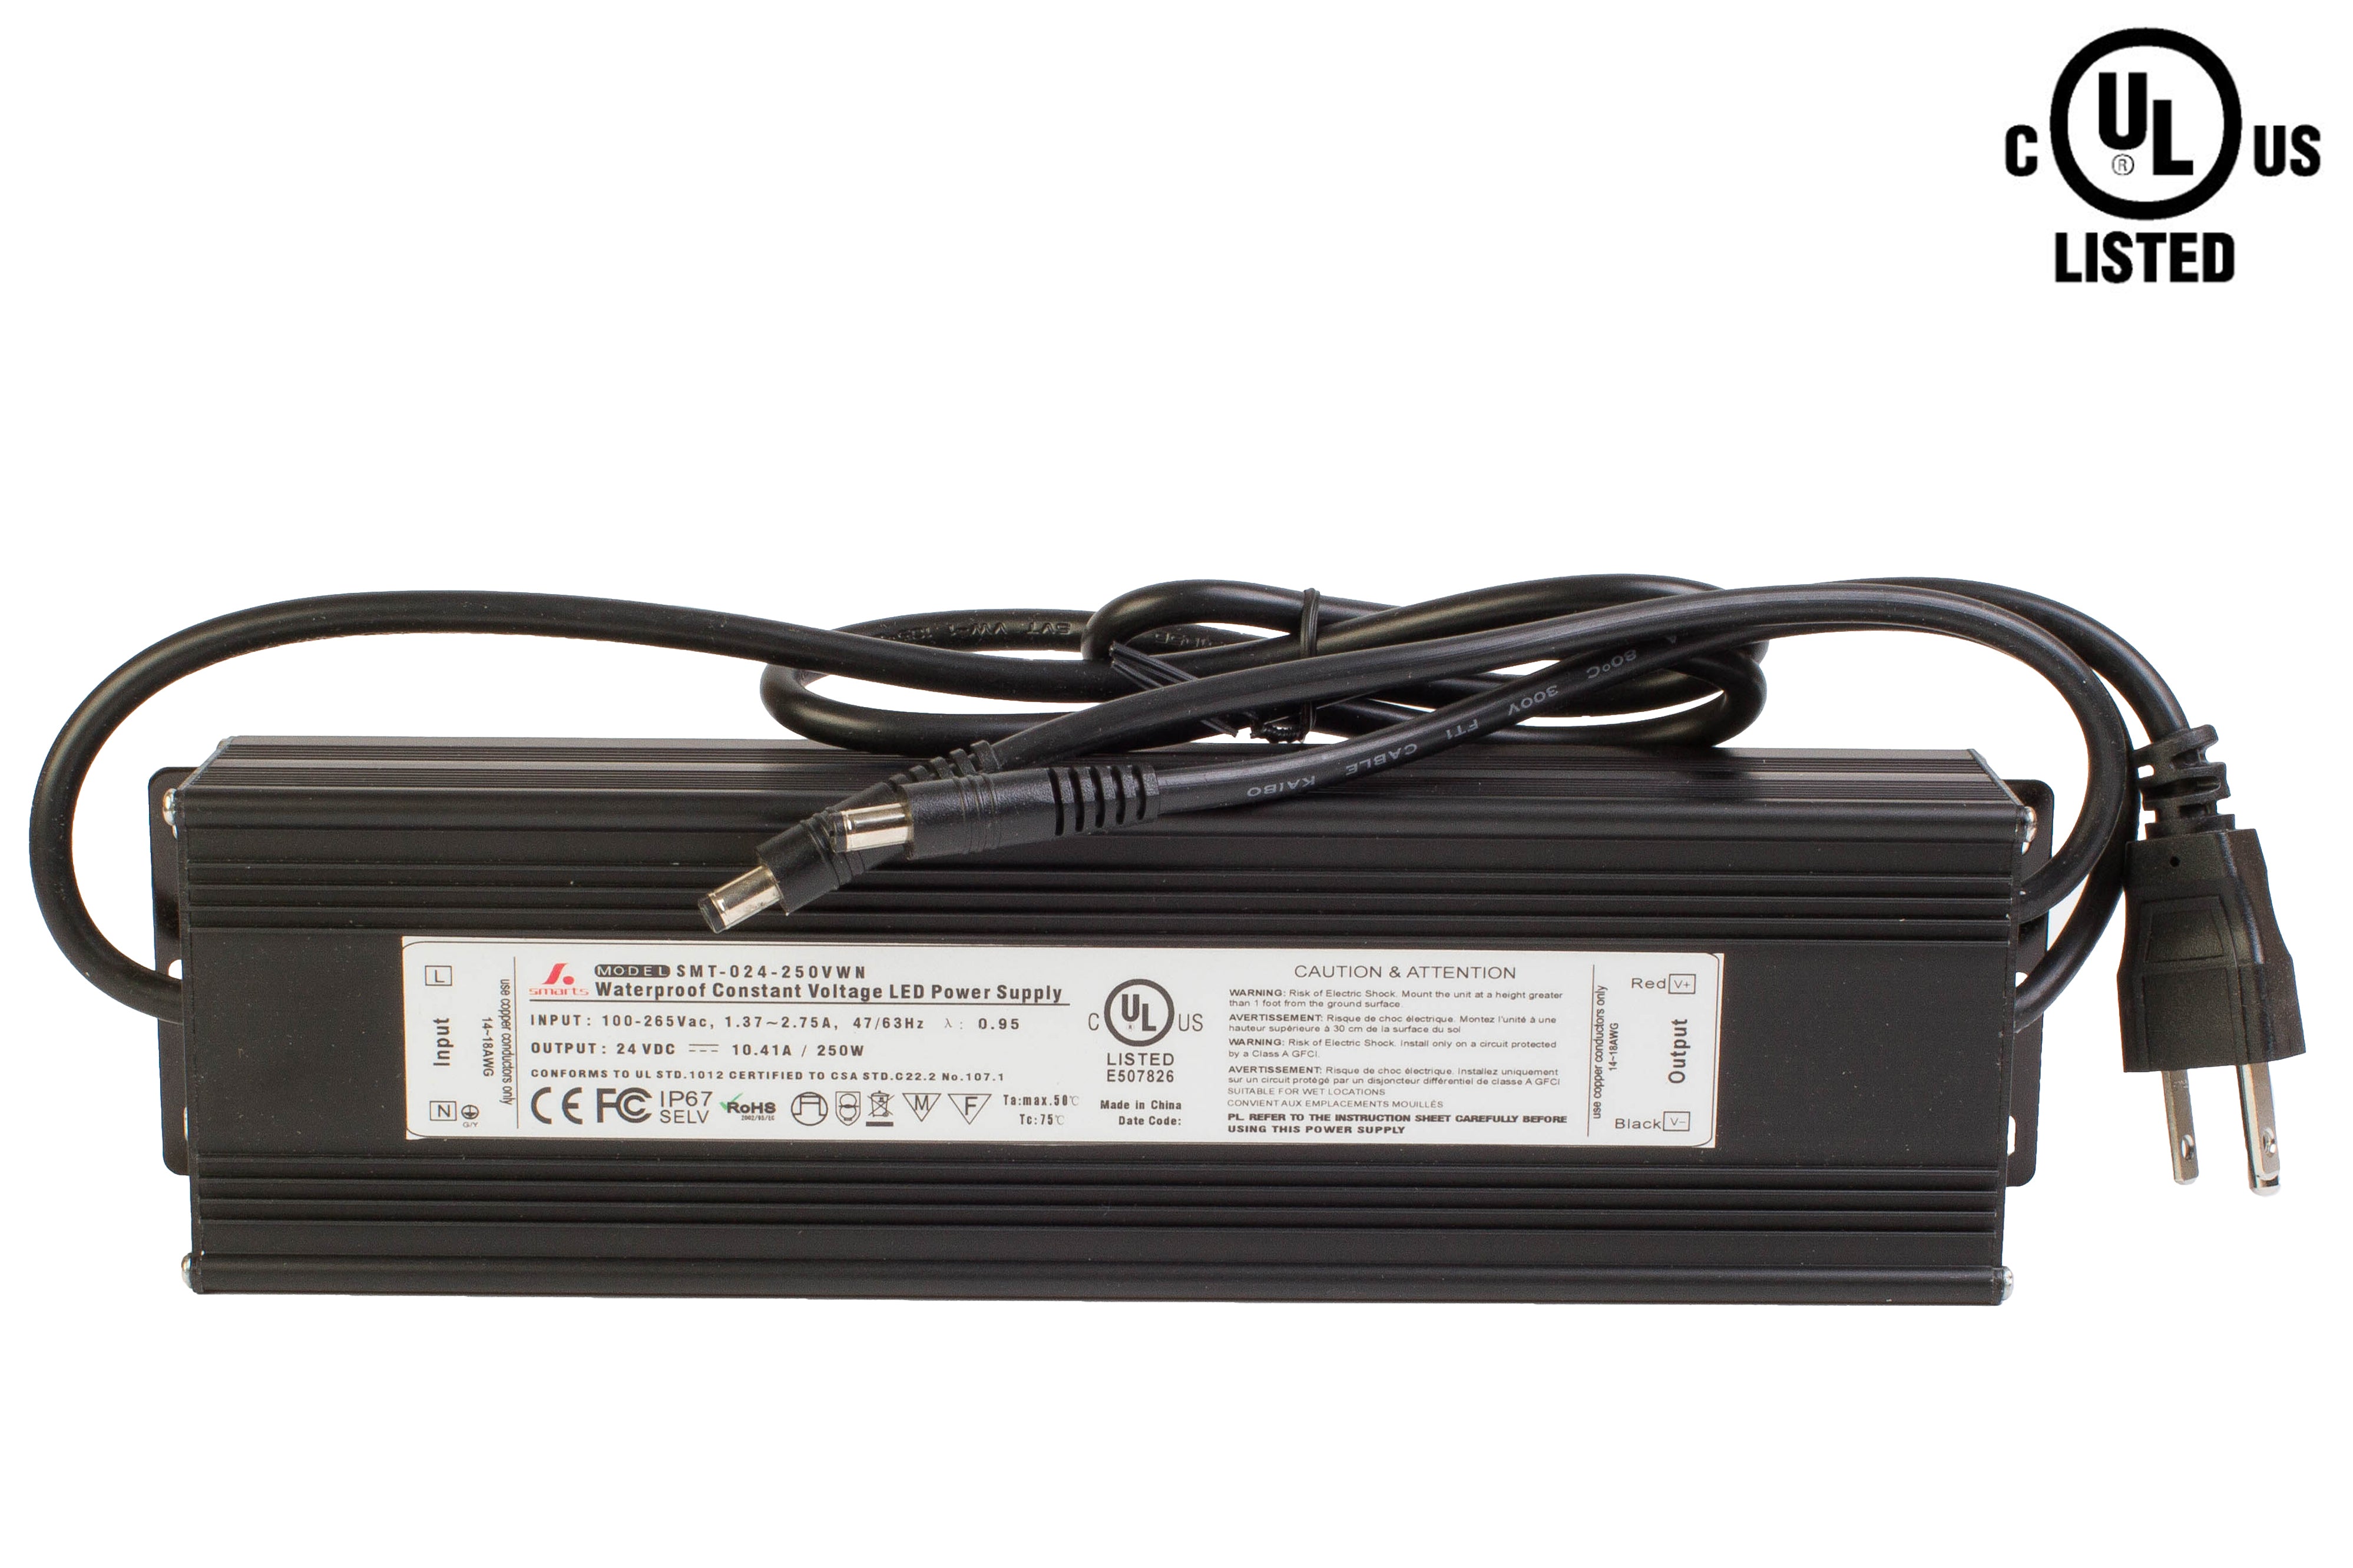 UL Listed 24v 10.41Amps 250w Constant Voltage waterproof Power Supply Driver  LEDUpdates